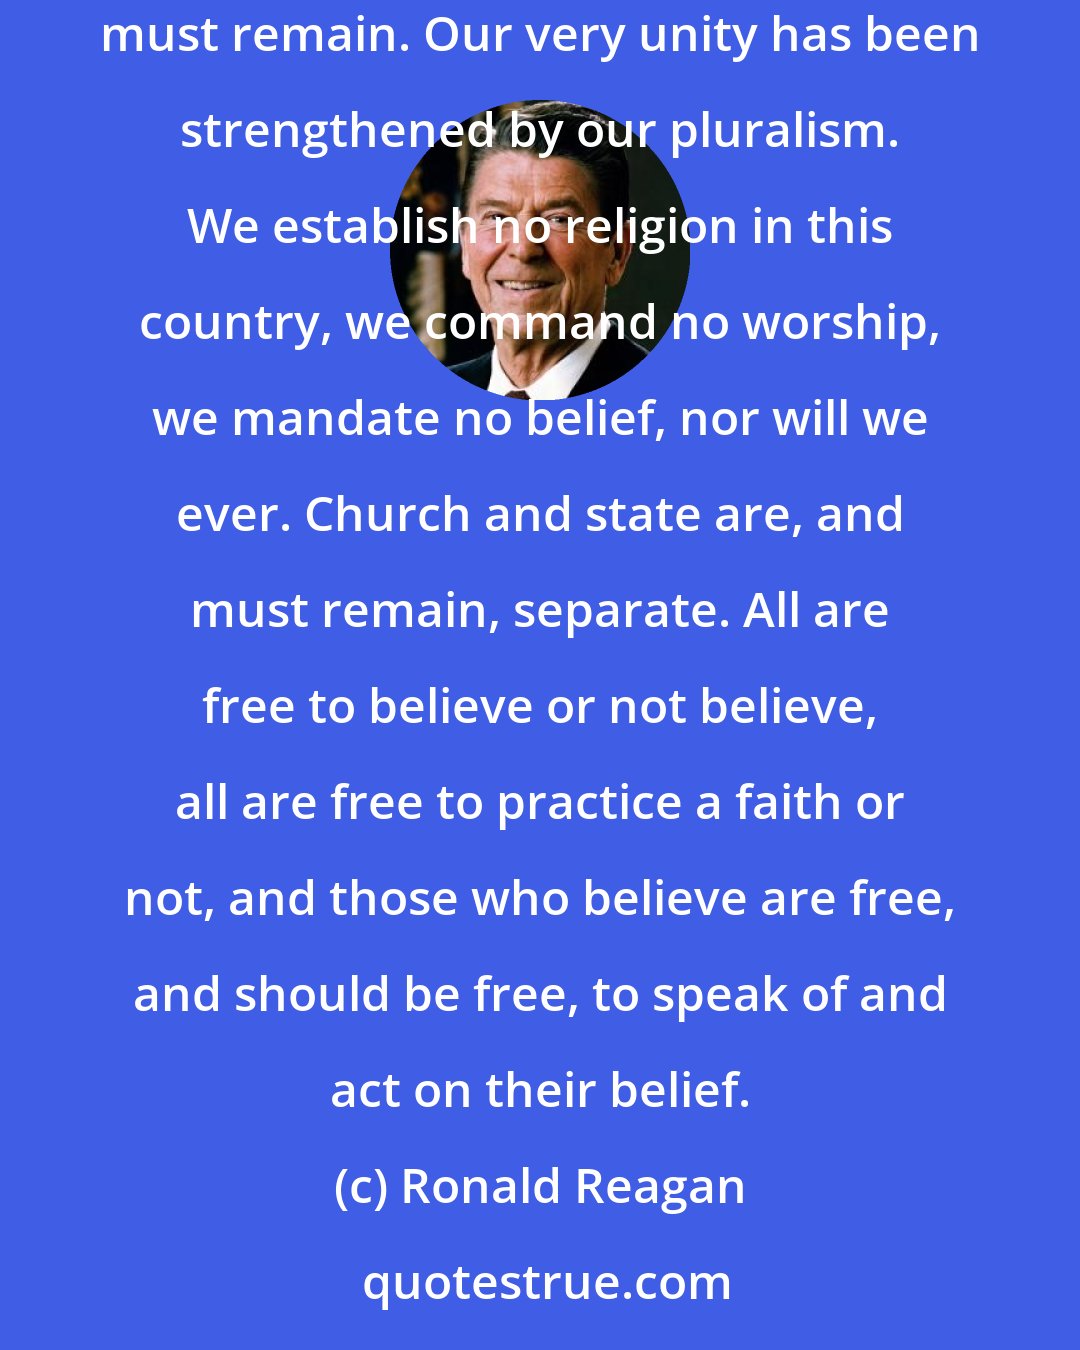 Ronald Reagan: We in the United States, above all, must remember that lesson, for we were founded as a nation of openness to people of all beliefs. And so we must remain. Our very unity has been strengthened by our pluralism. We establish no religion in this country, we command no worship, we mandate no belief, nor will we ever. Church and state are, and must remain, separate. All are free to believe or not believe, all are free to practice a faith or not, and those who believe are free, and should be free, to speak of and act on their belief.